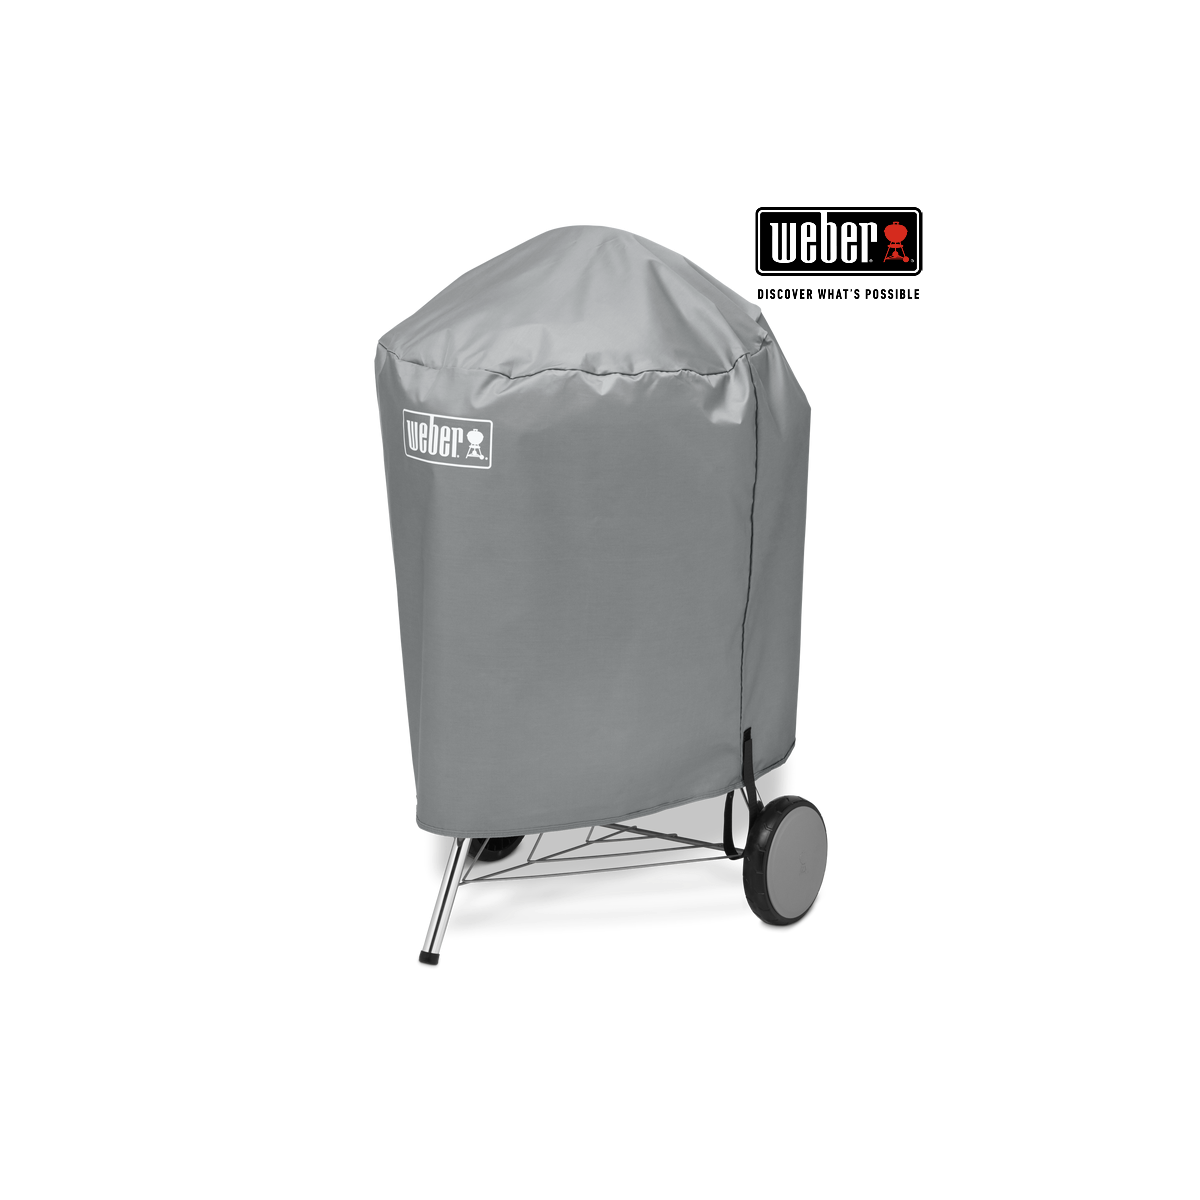 WEBER BARBECUE COVER - FITS 57CM CHARCOAL BARBECUES, 7176